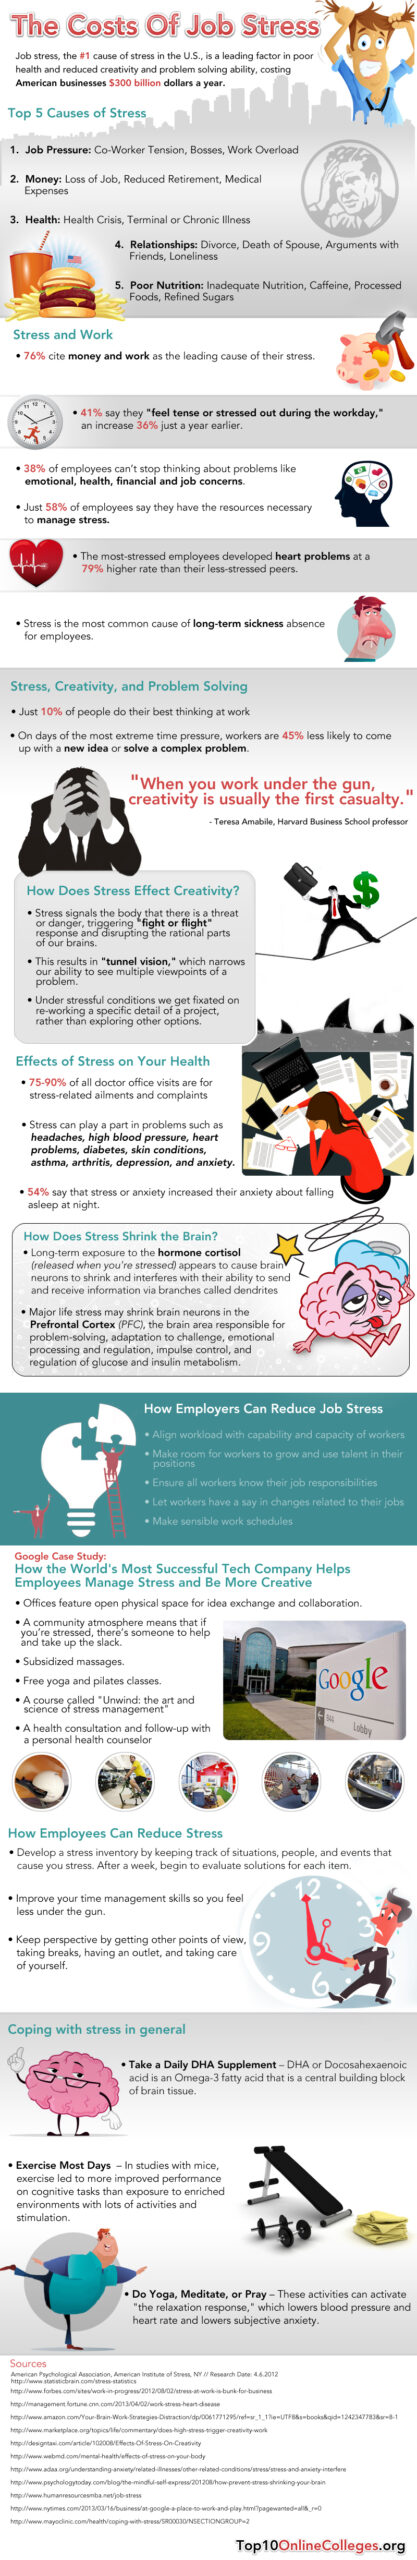 The Cost of Job Stress